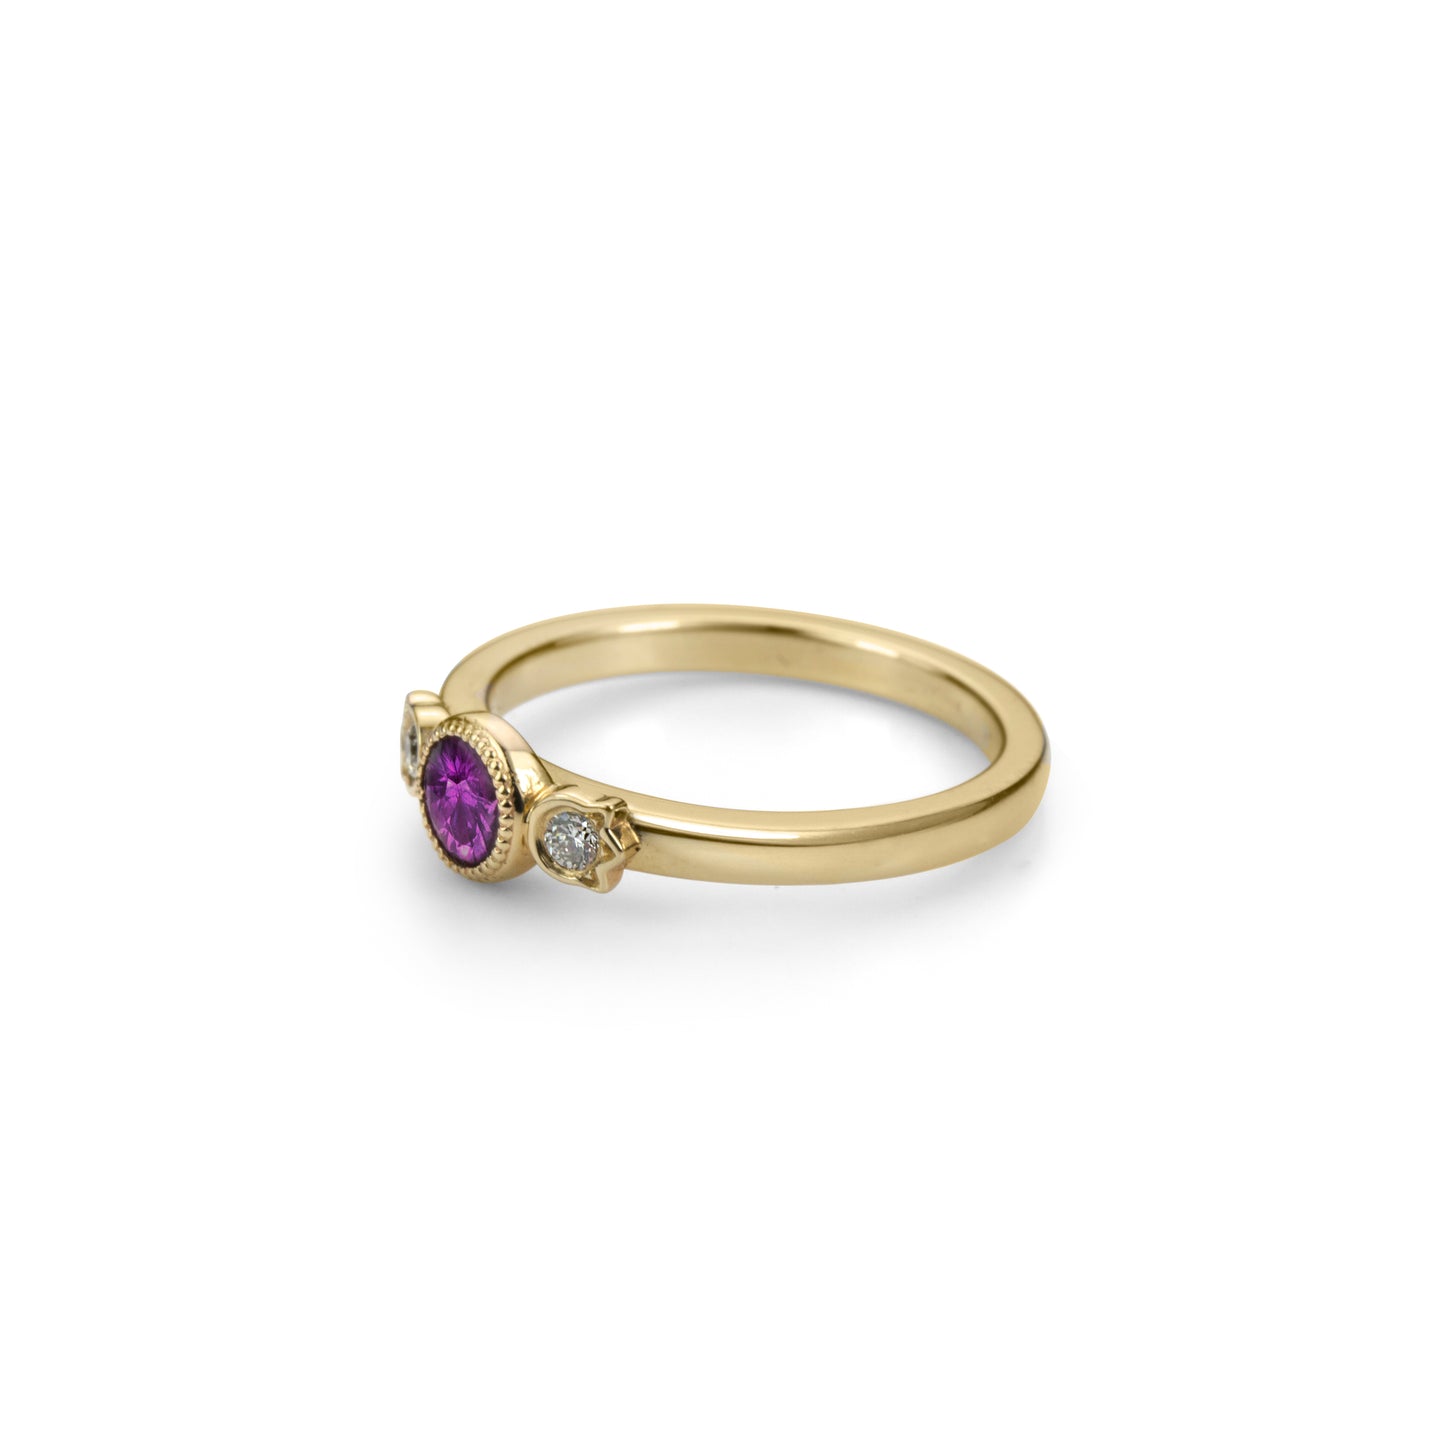 Yellow gold stackable ring with round beaded bezel set plum purple sapphire and diamonds in flower setting on each side in profile view.